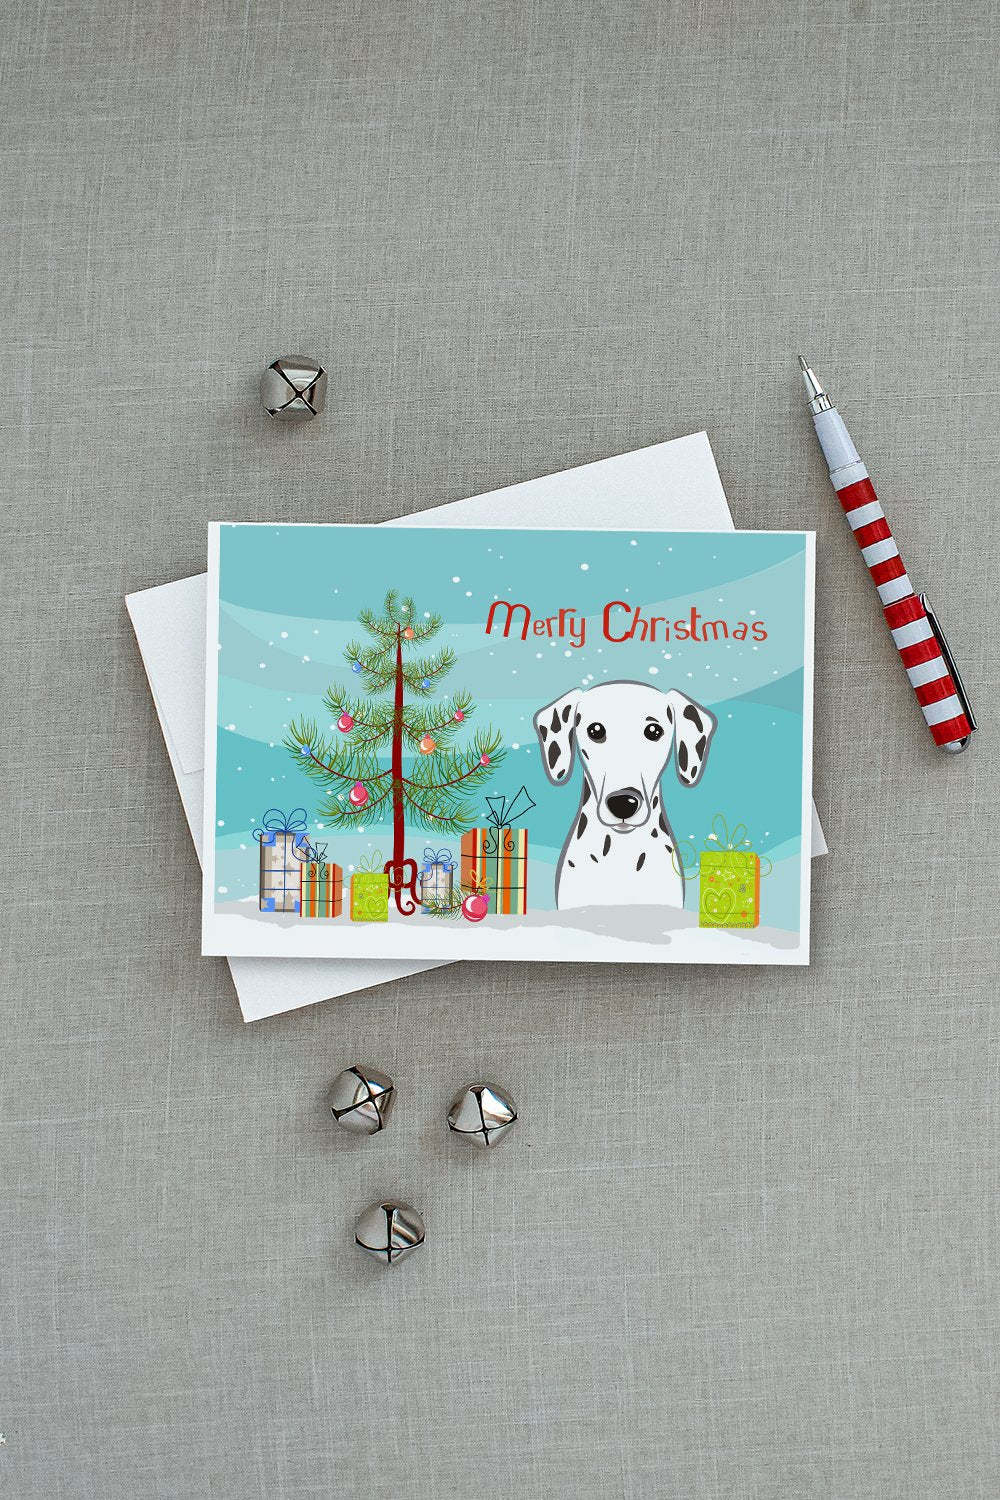 Christmas Tree and Dalmatian Greeting Cards and Envelopes Pack of 8 - the-store.com